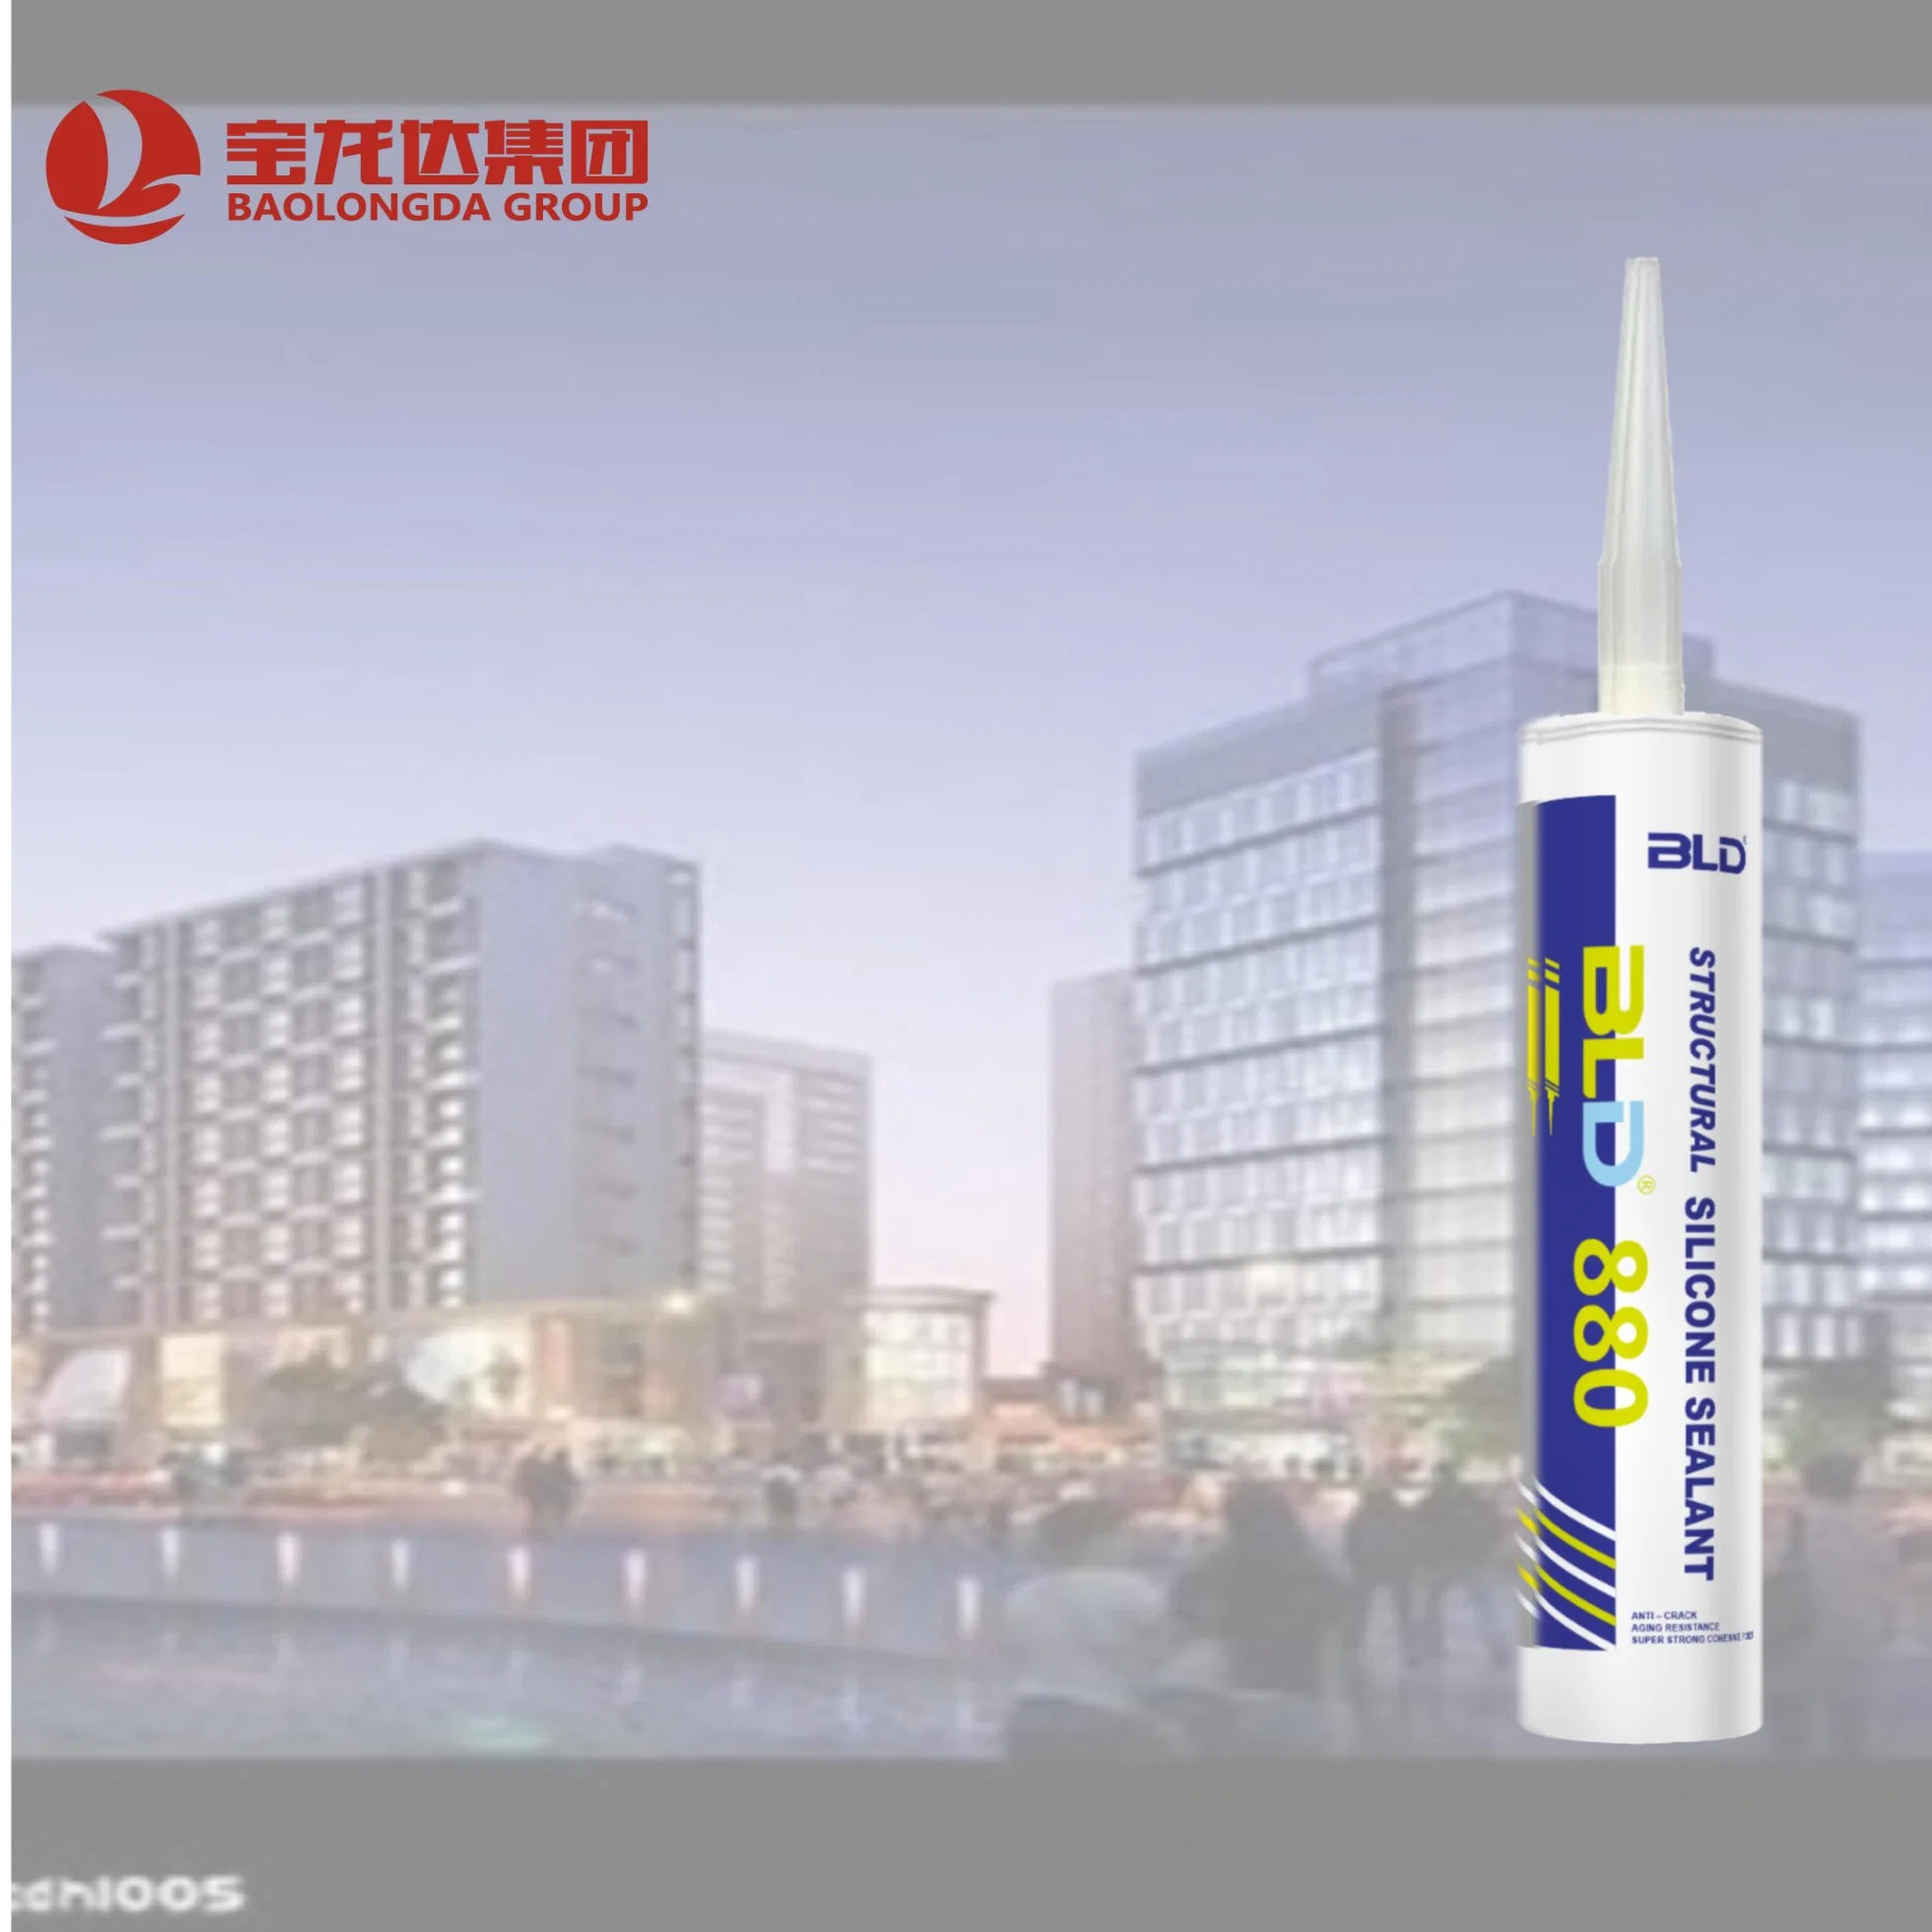 Hot Selling Fcatory Supply Caulk Structural Sealant Silicone Sealant Waterproof Silicone Sealant for Construction